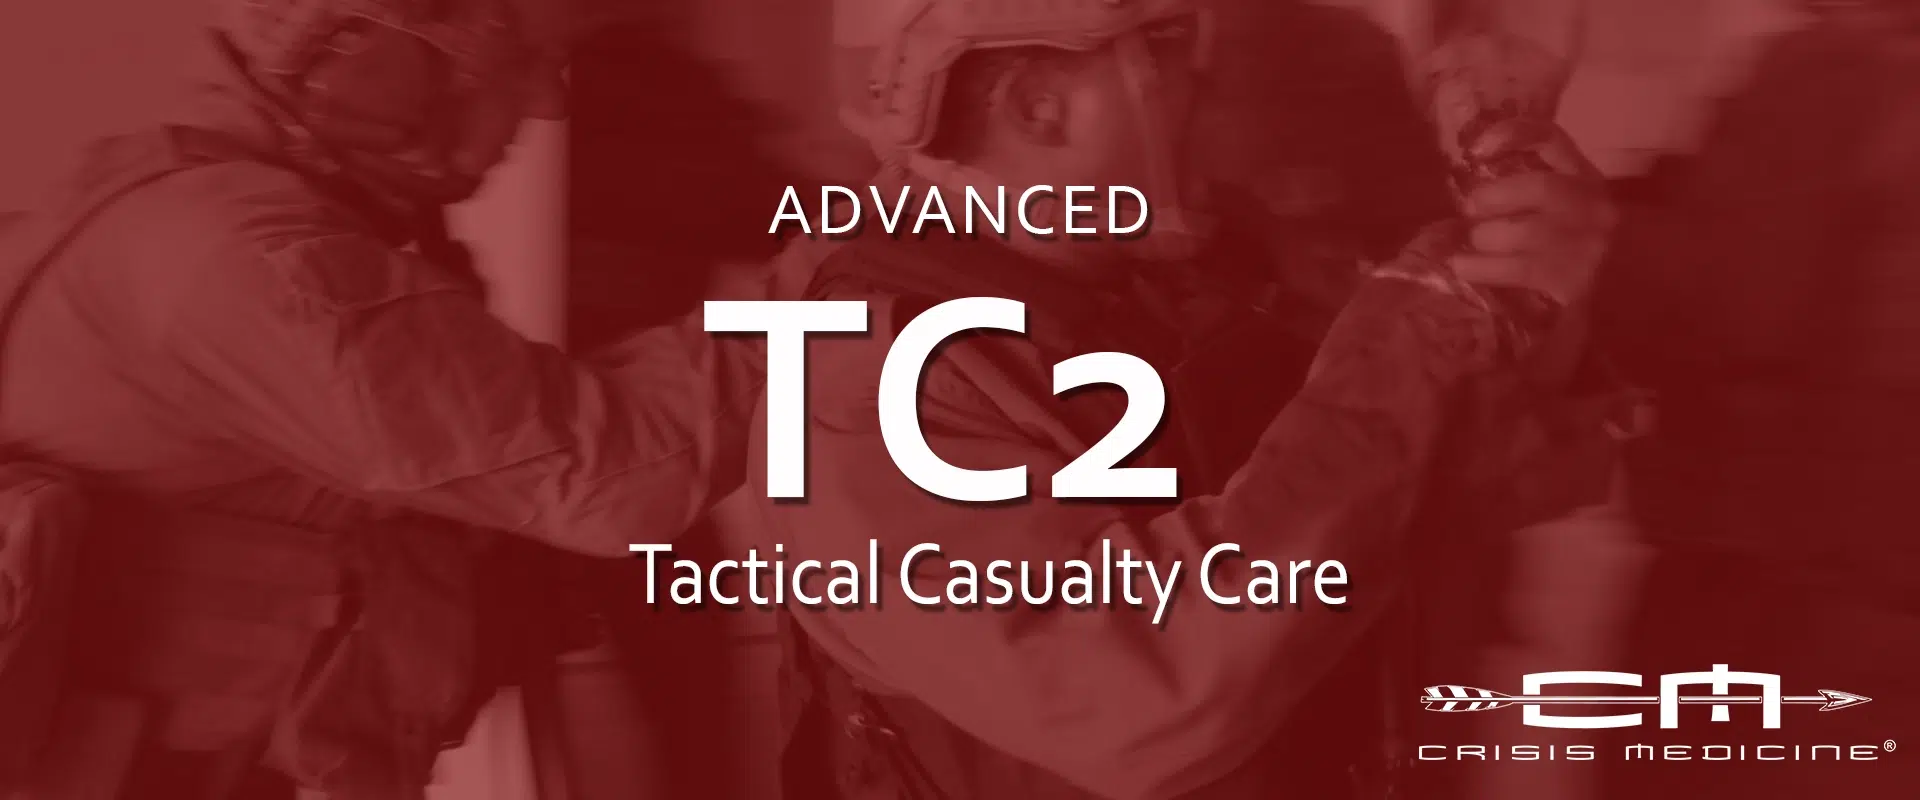 Advanced Tactical Casualty Care (ATC2)